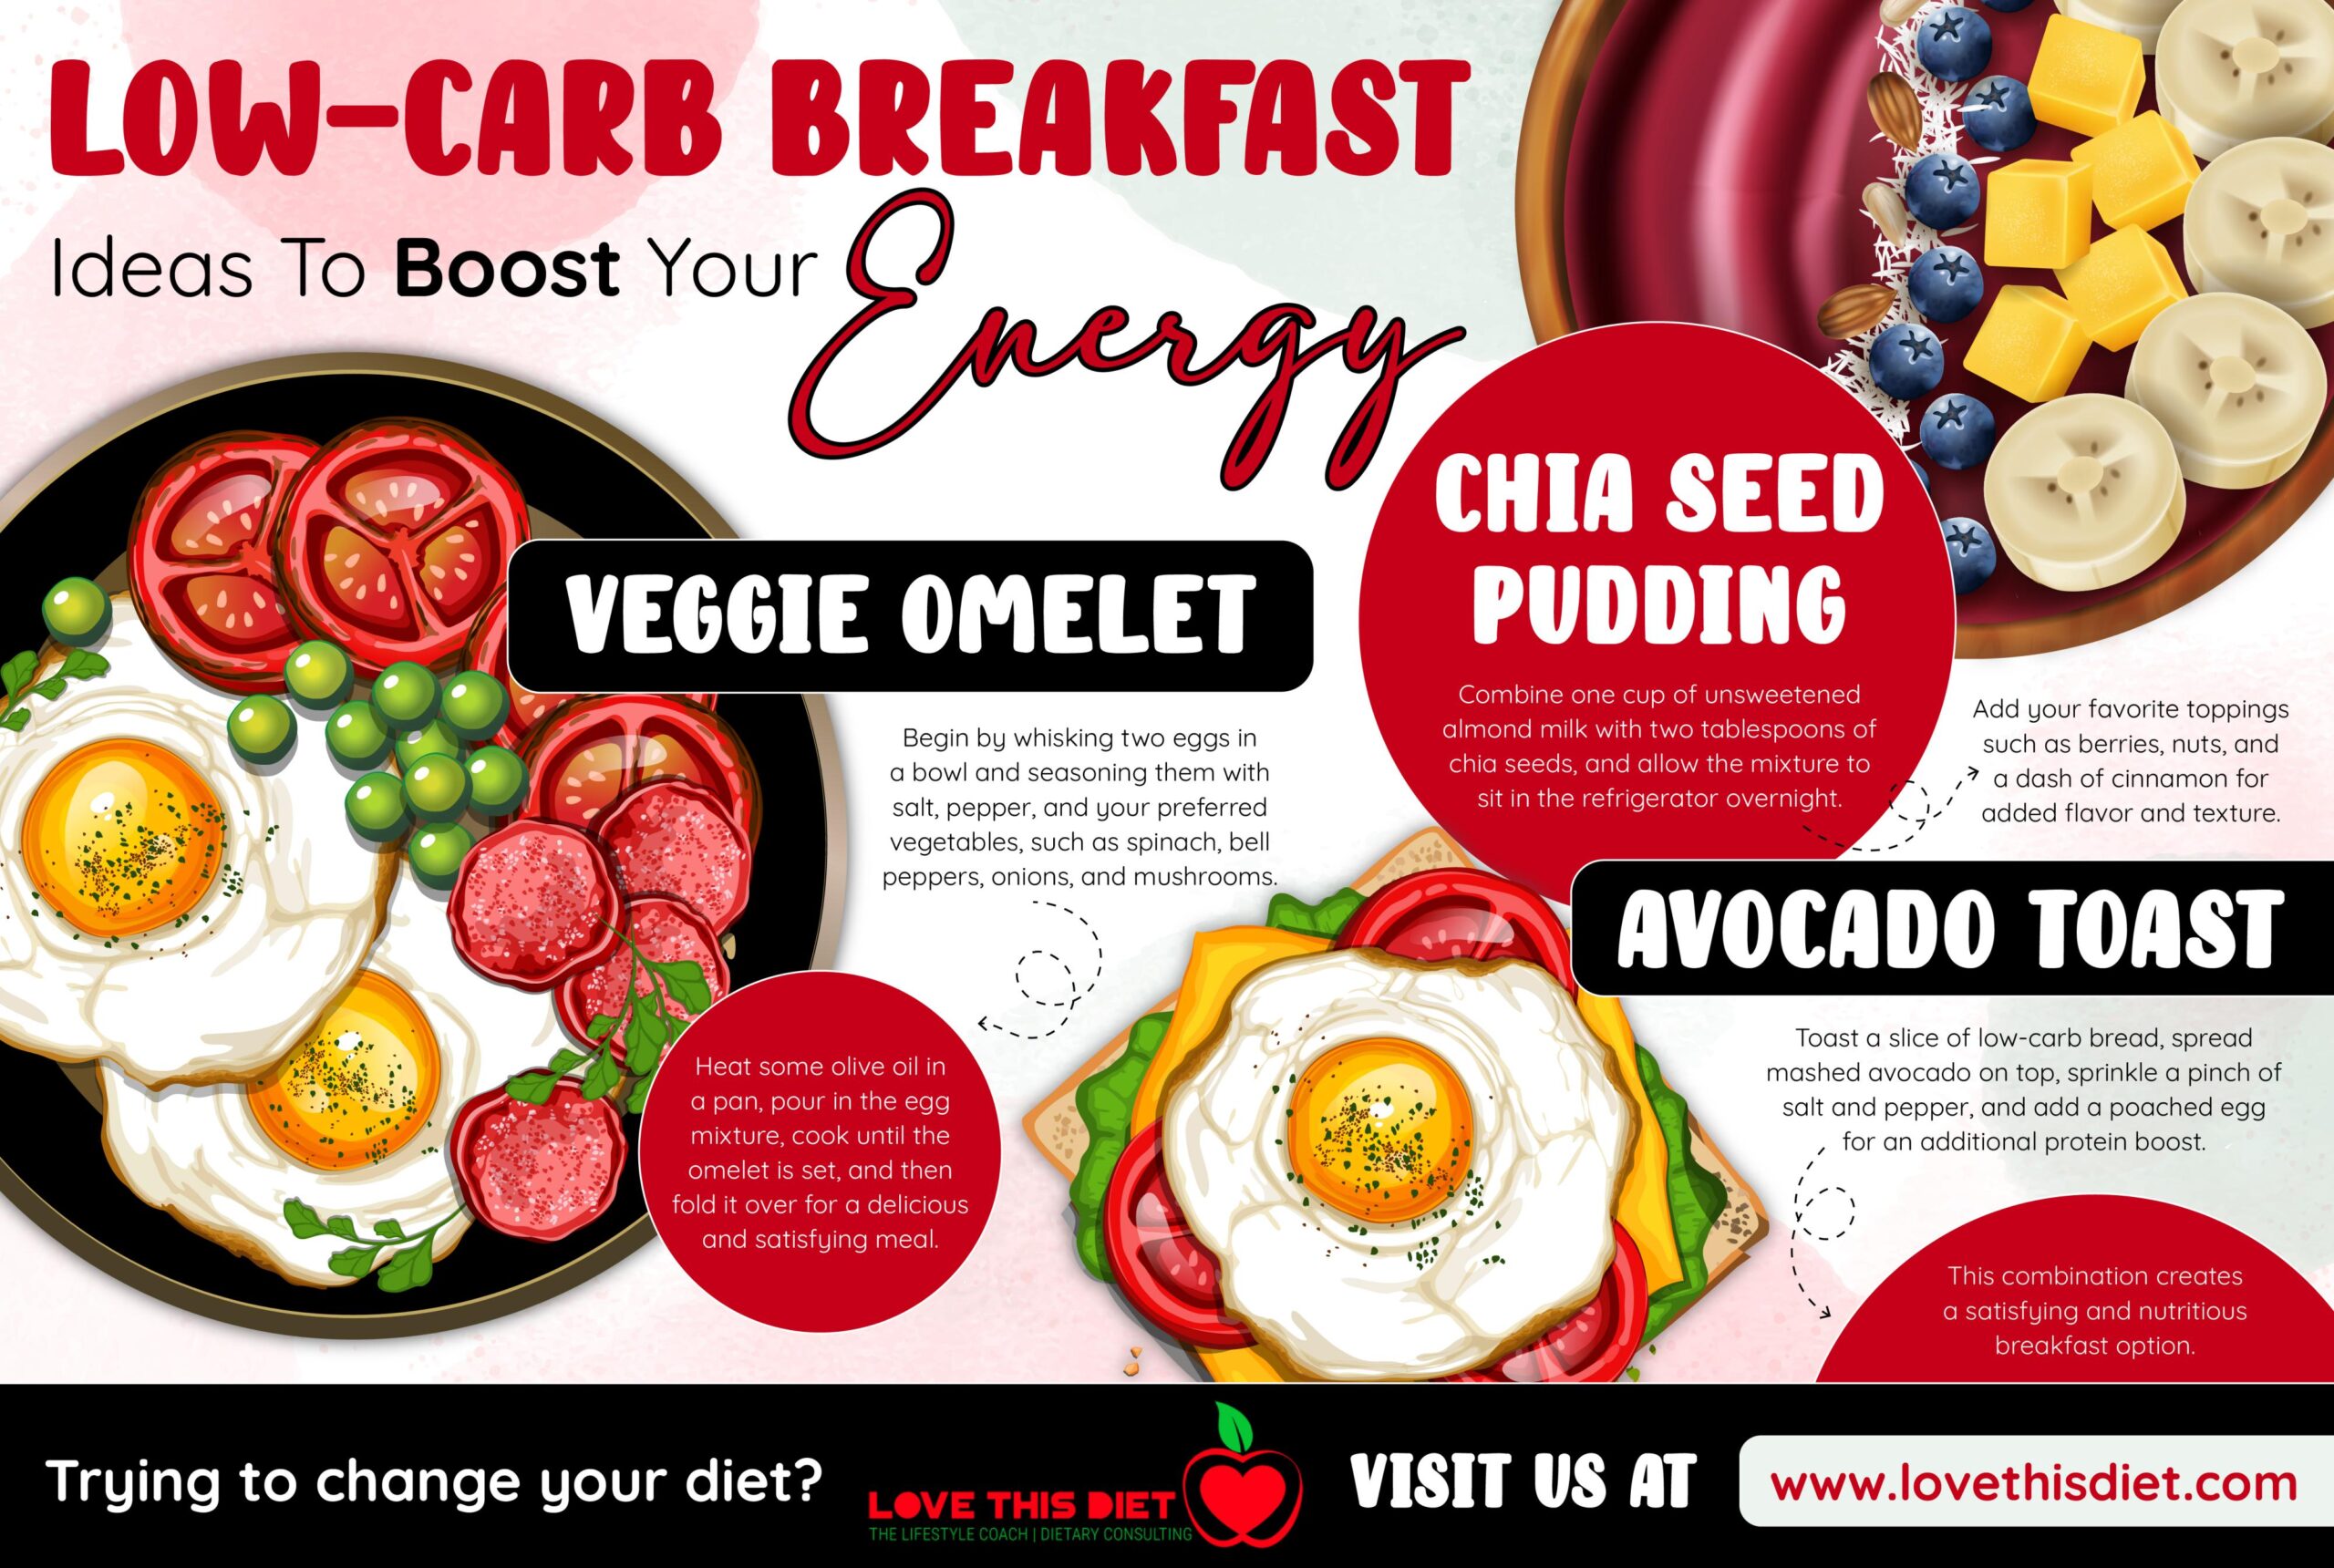 LOW-CARB BREAKFAST Ideas To Boost Your Energy